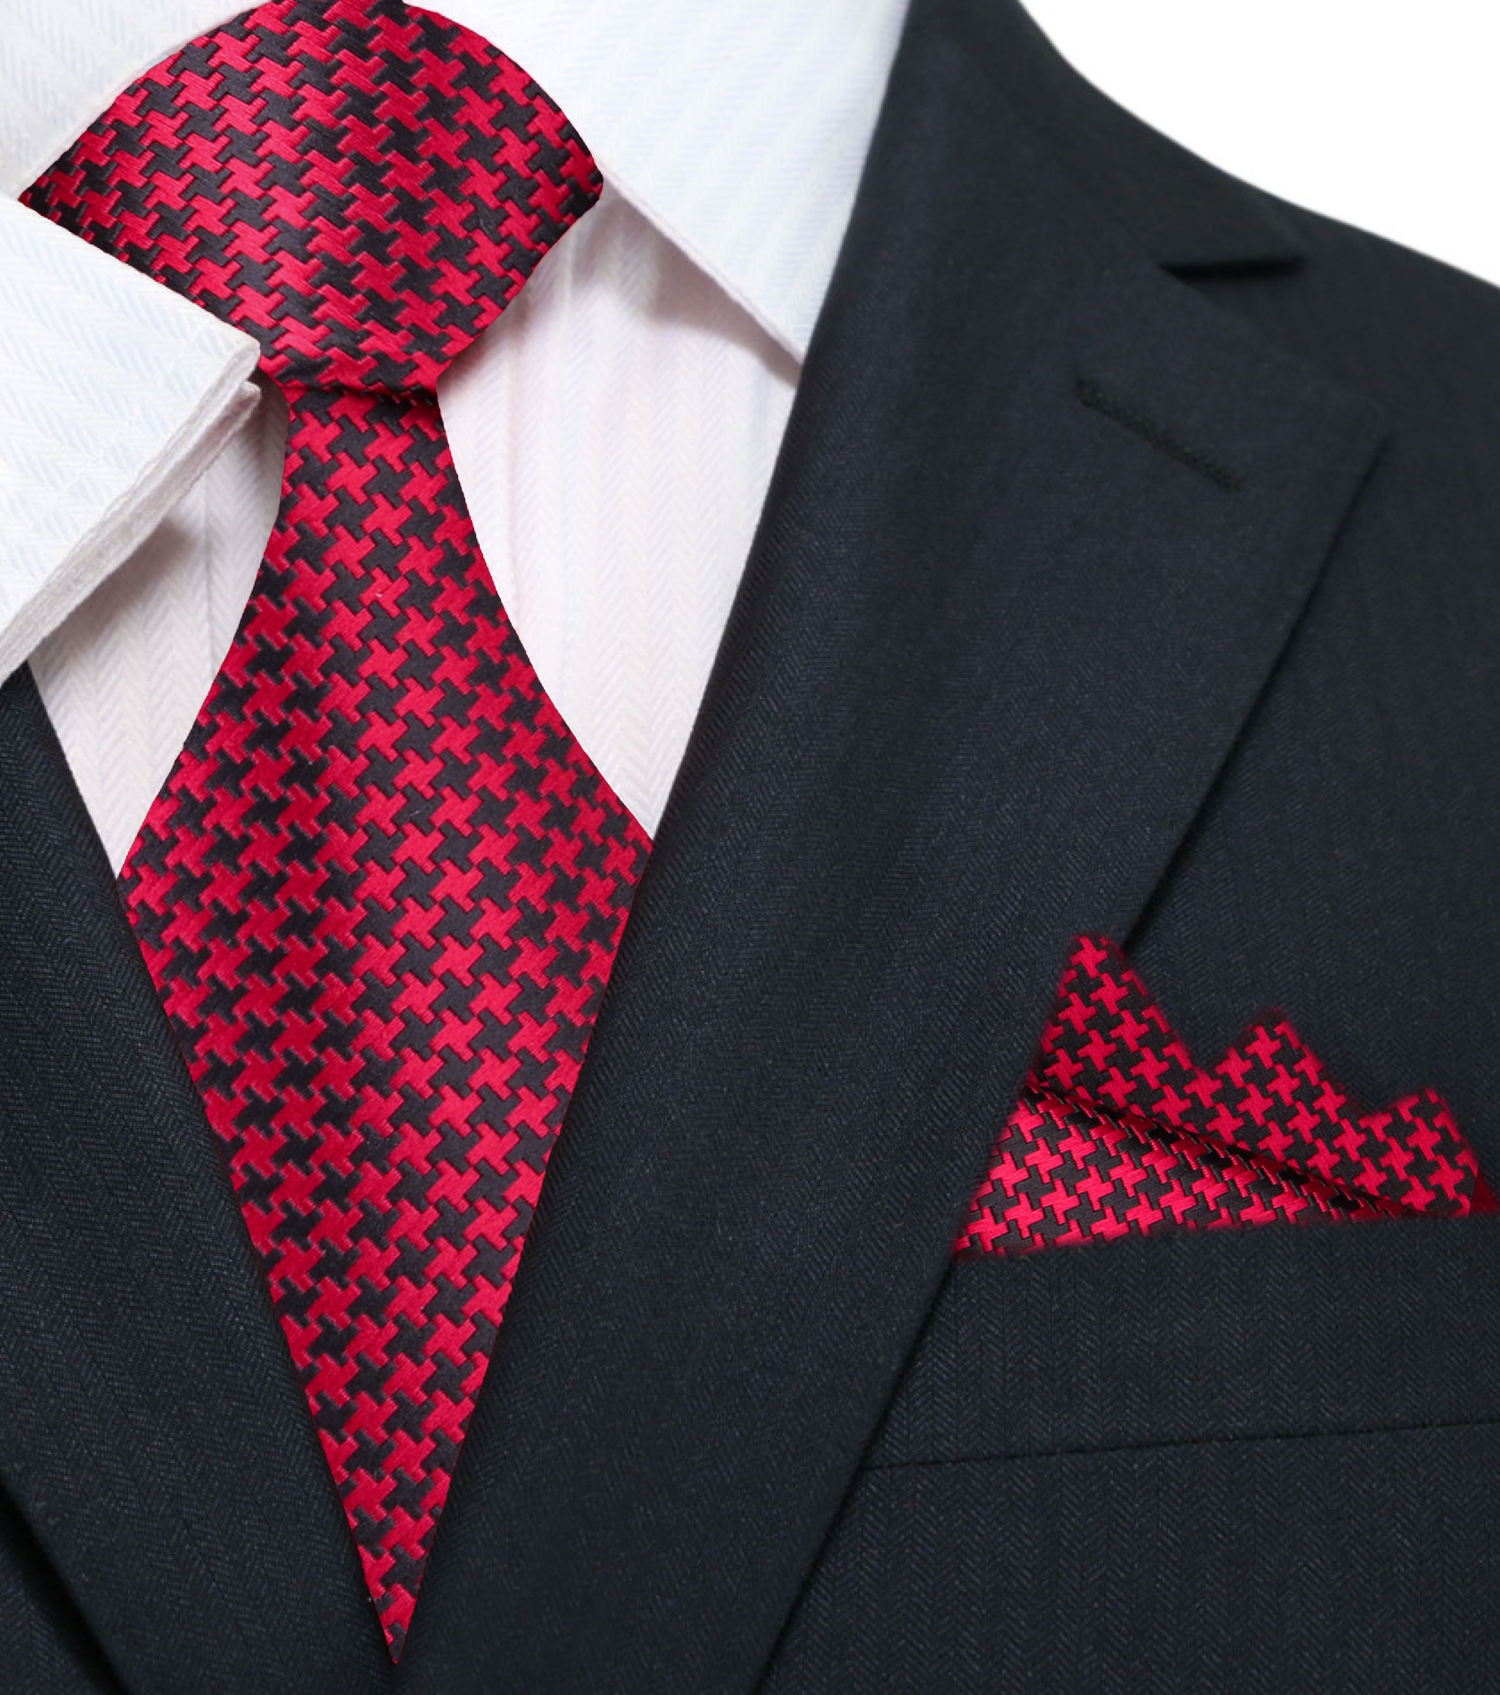 Main: Red and Black Hounds Tooth Tie and Pocket Square